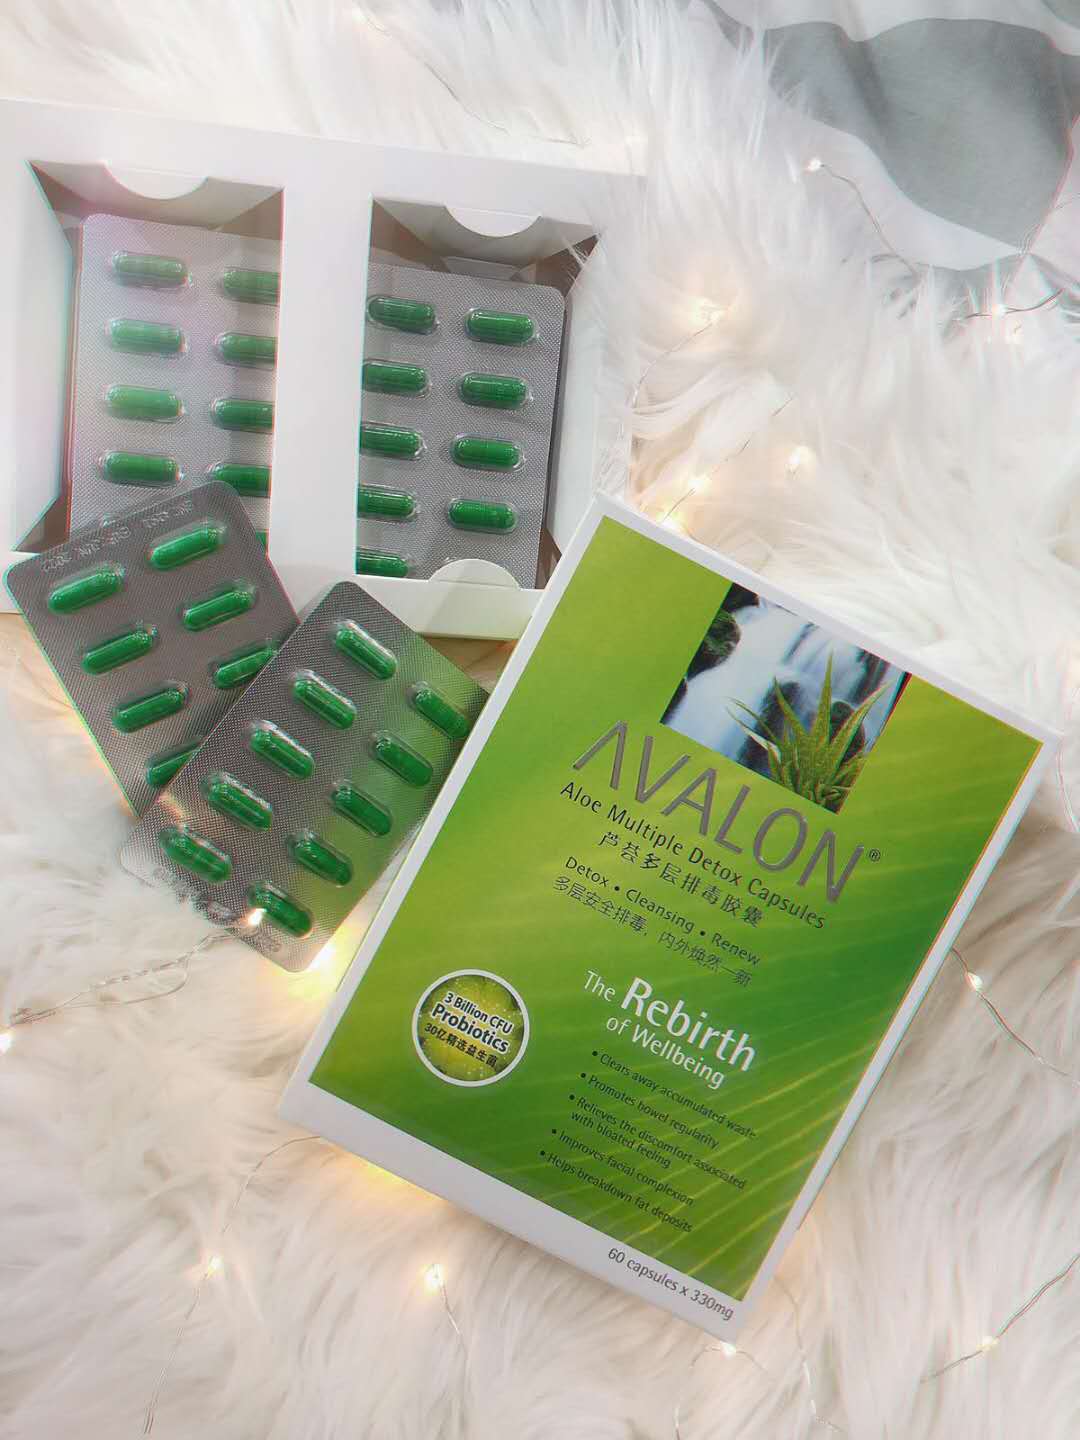 Avalon Aloe Multiple Detox (w/ Probiotics) - Best-Selling Detox Supplement in Singapore for 12 years (since 2007). Halal-certified and suitable for Vegetarians. Effective within 3 days, eliminate waste & toxins in the body. 100% natural with no laxatives - uses Aloe Barbadensis - highest medicinal value out of 500 species of Aloe - Vitamins A, B12, C, E, and Probiotics. 